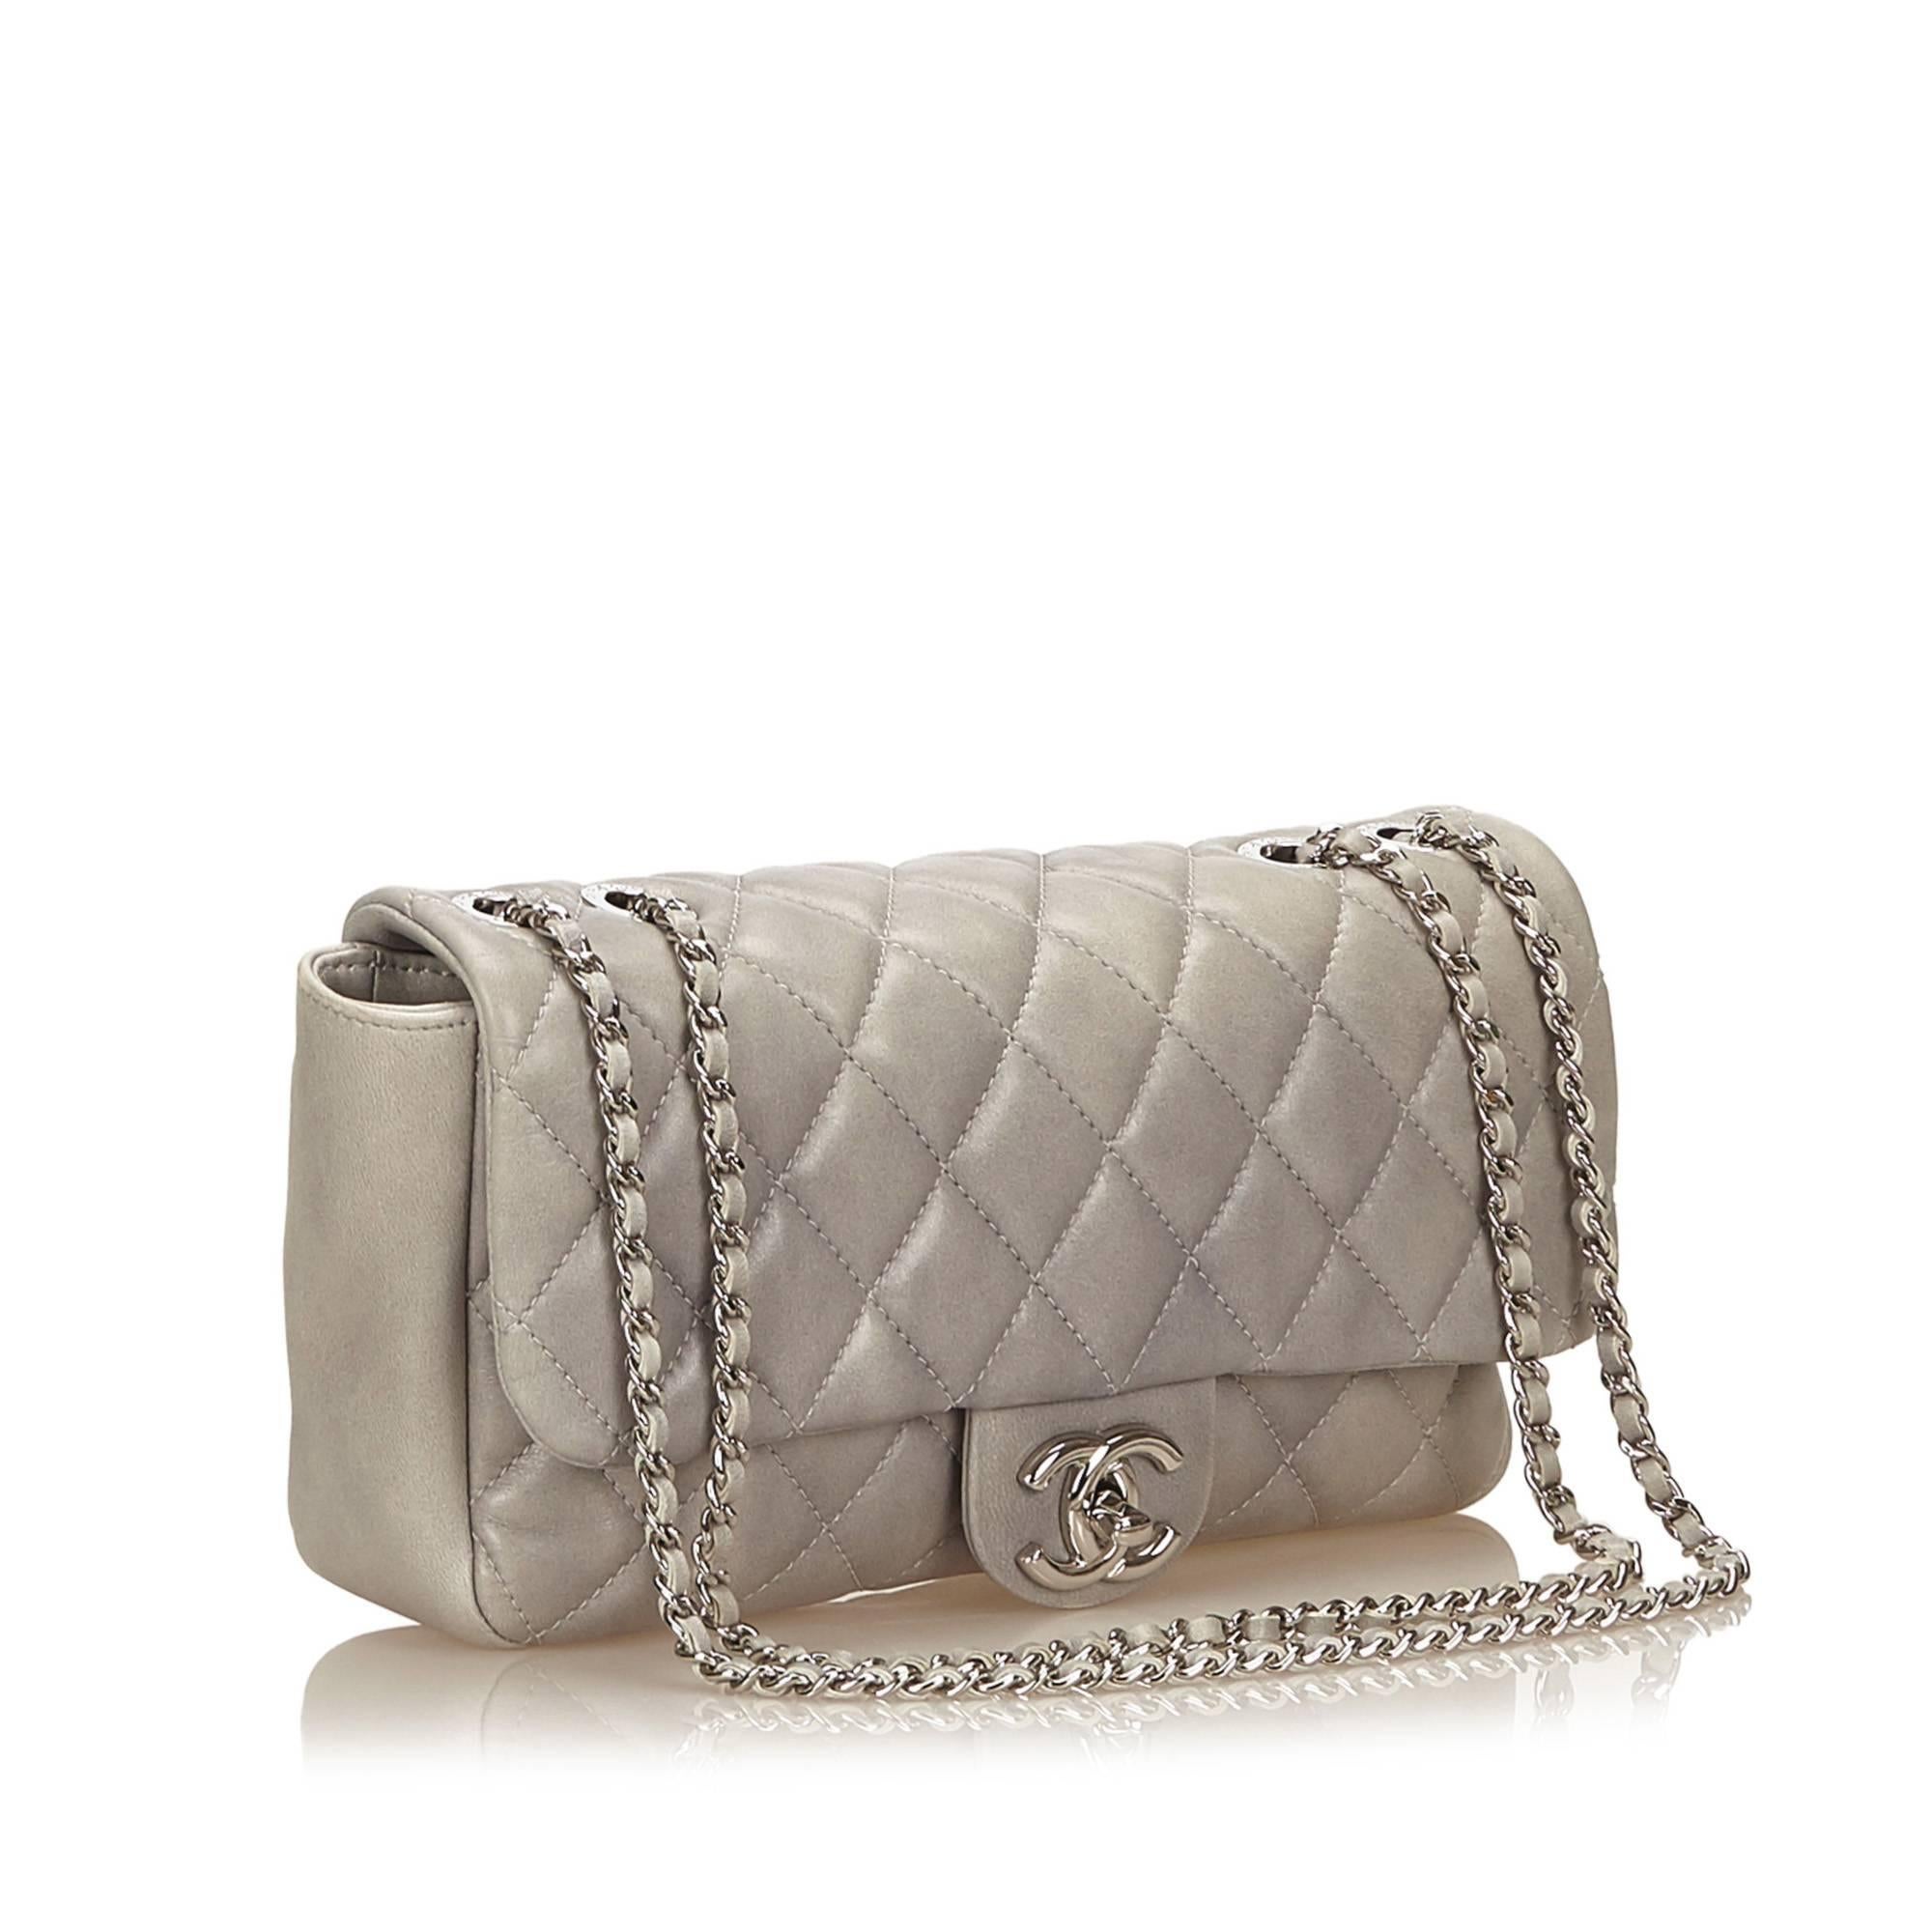 Women's Chanel Gray Matelasse Quilted Lambskin Leather Flap Shoulder Bag 